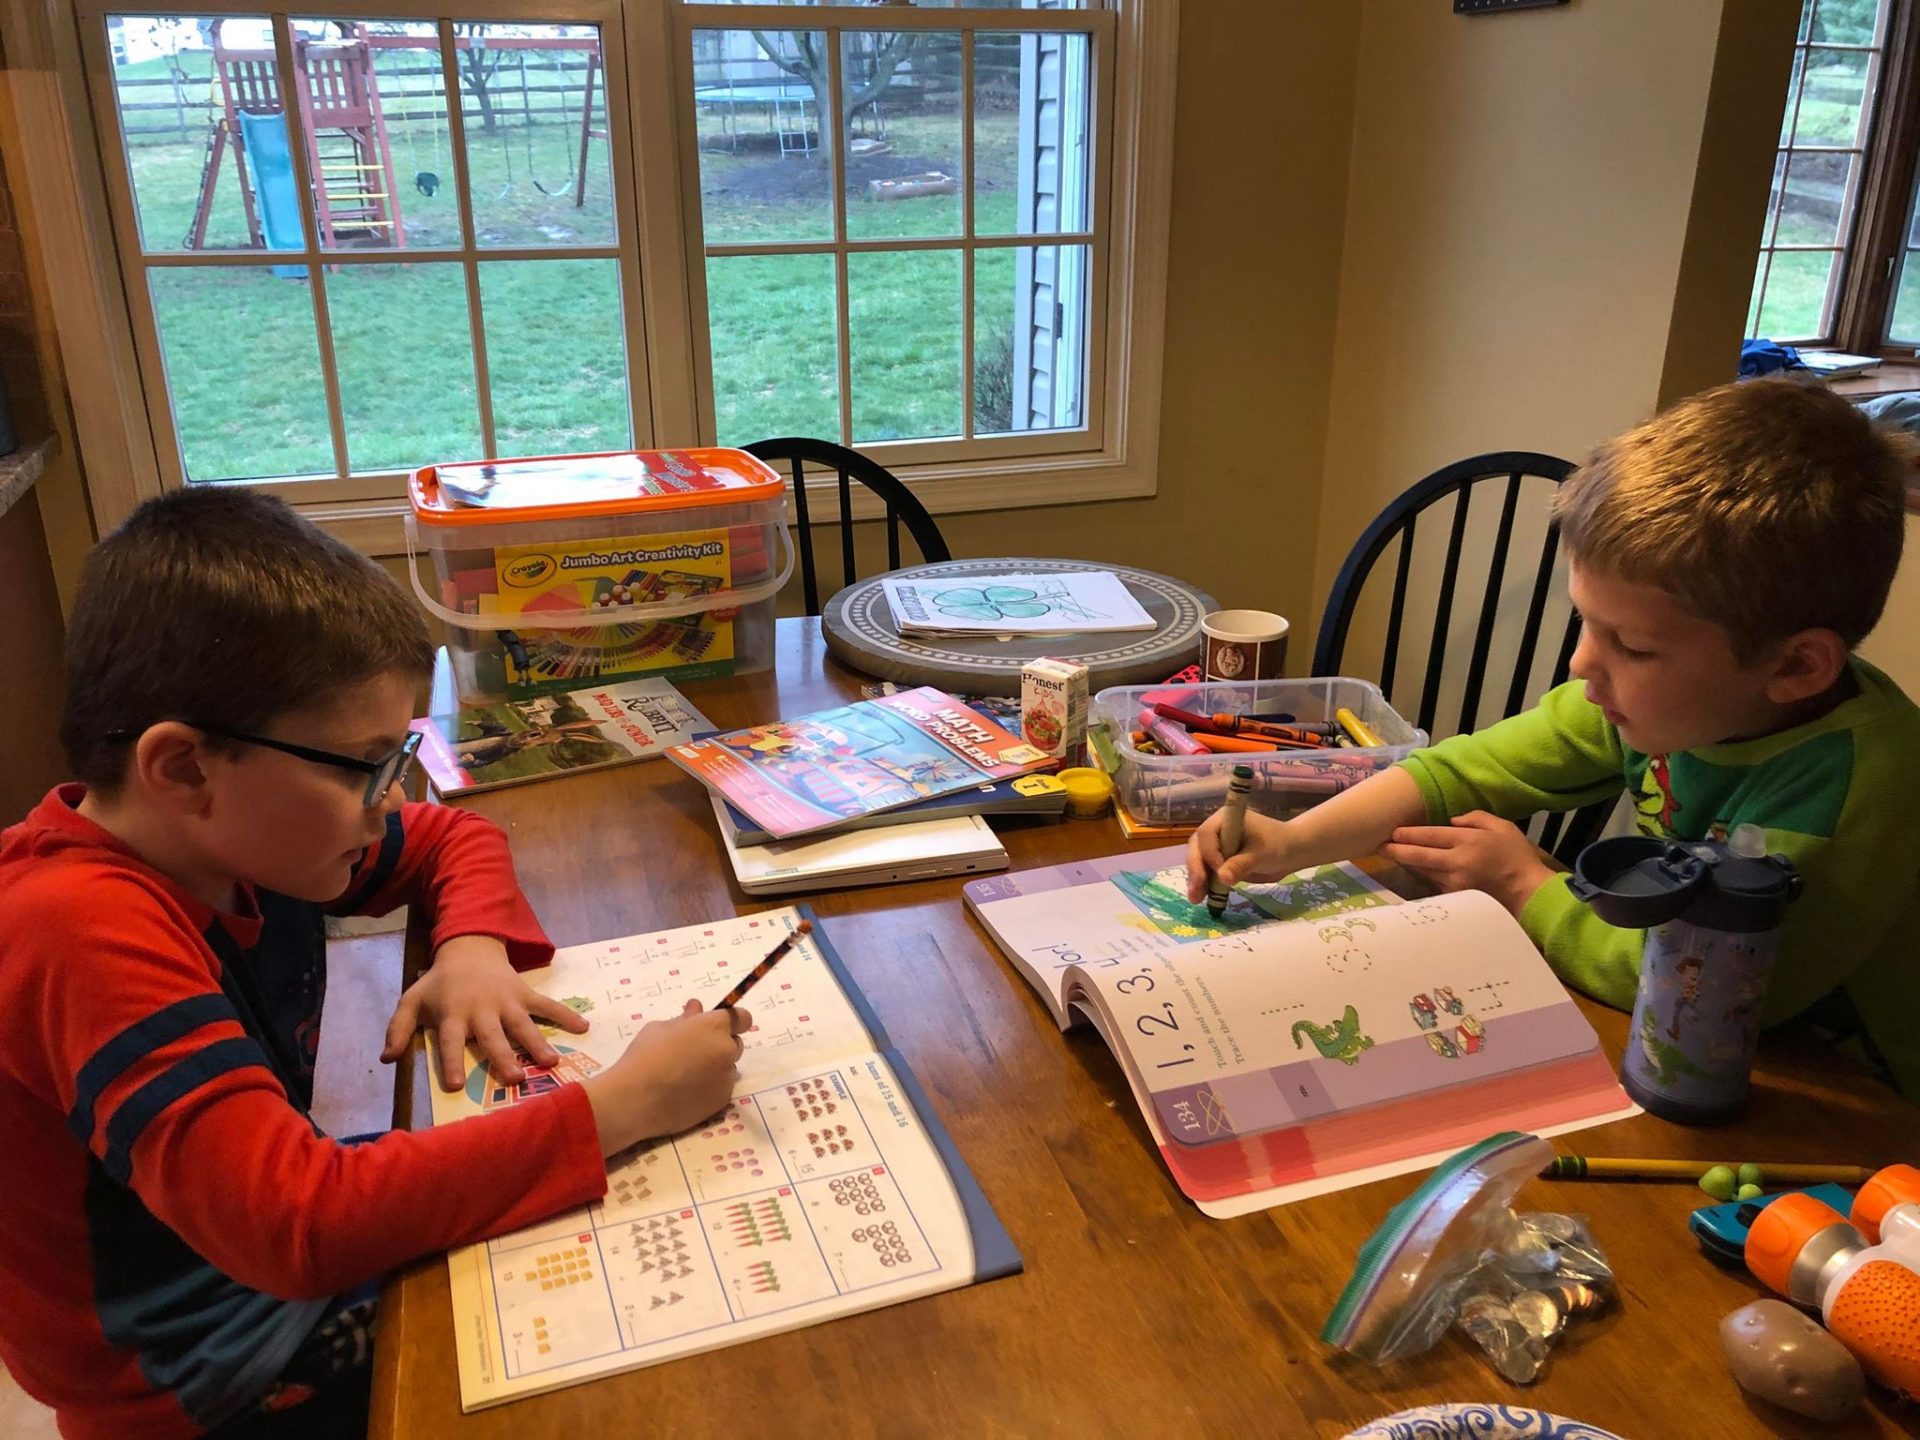 Tara Ryan-Schill's sons Andrew, left, and Luke, right, doing schoolwork at home. Andrew is an 8-year-old on the autism spectrum.